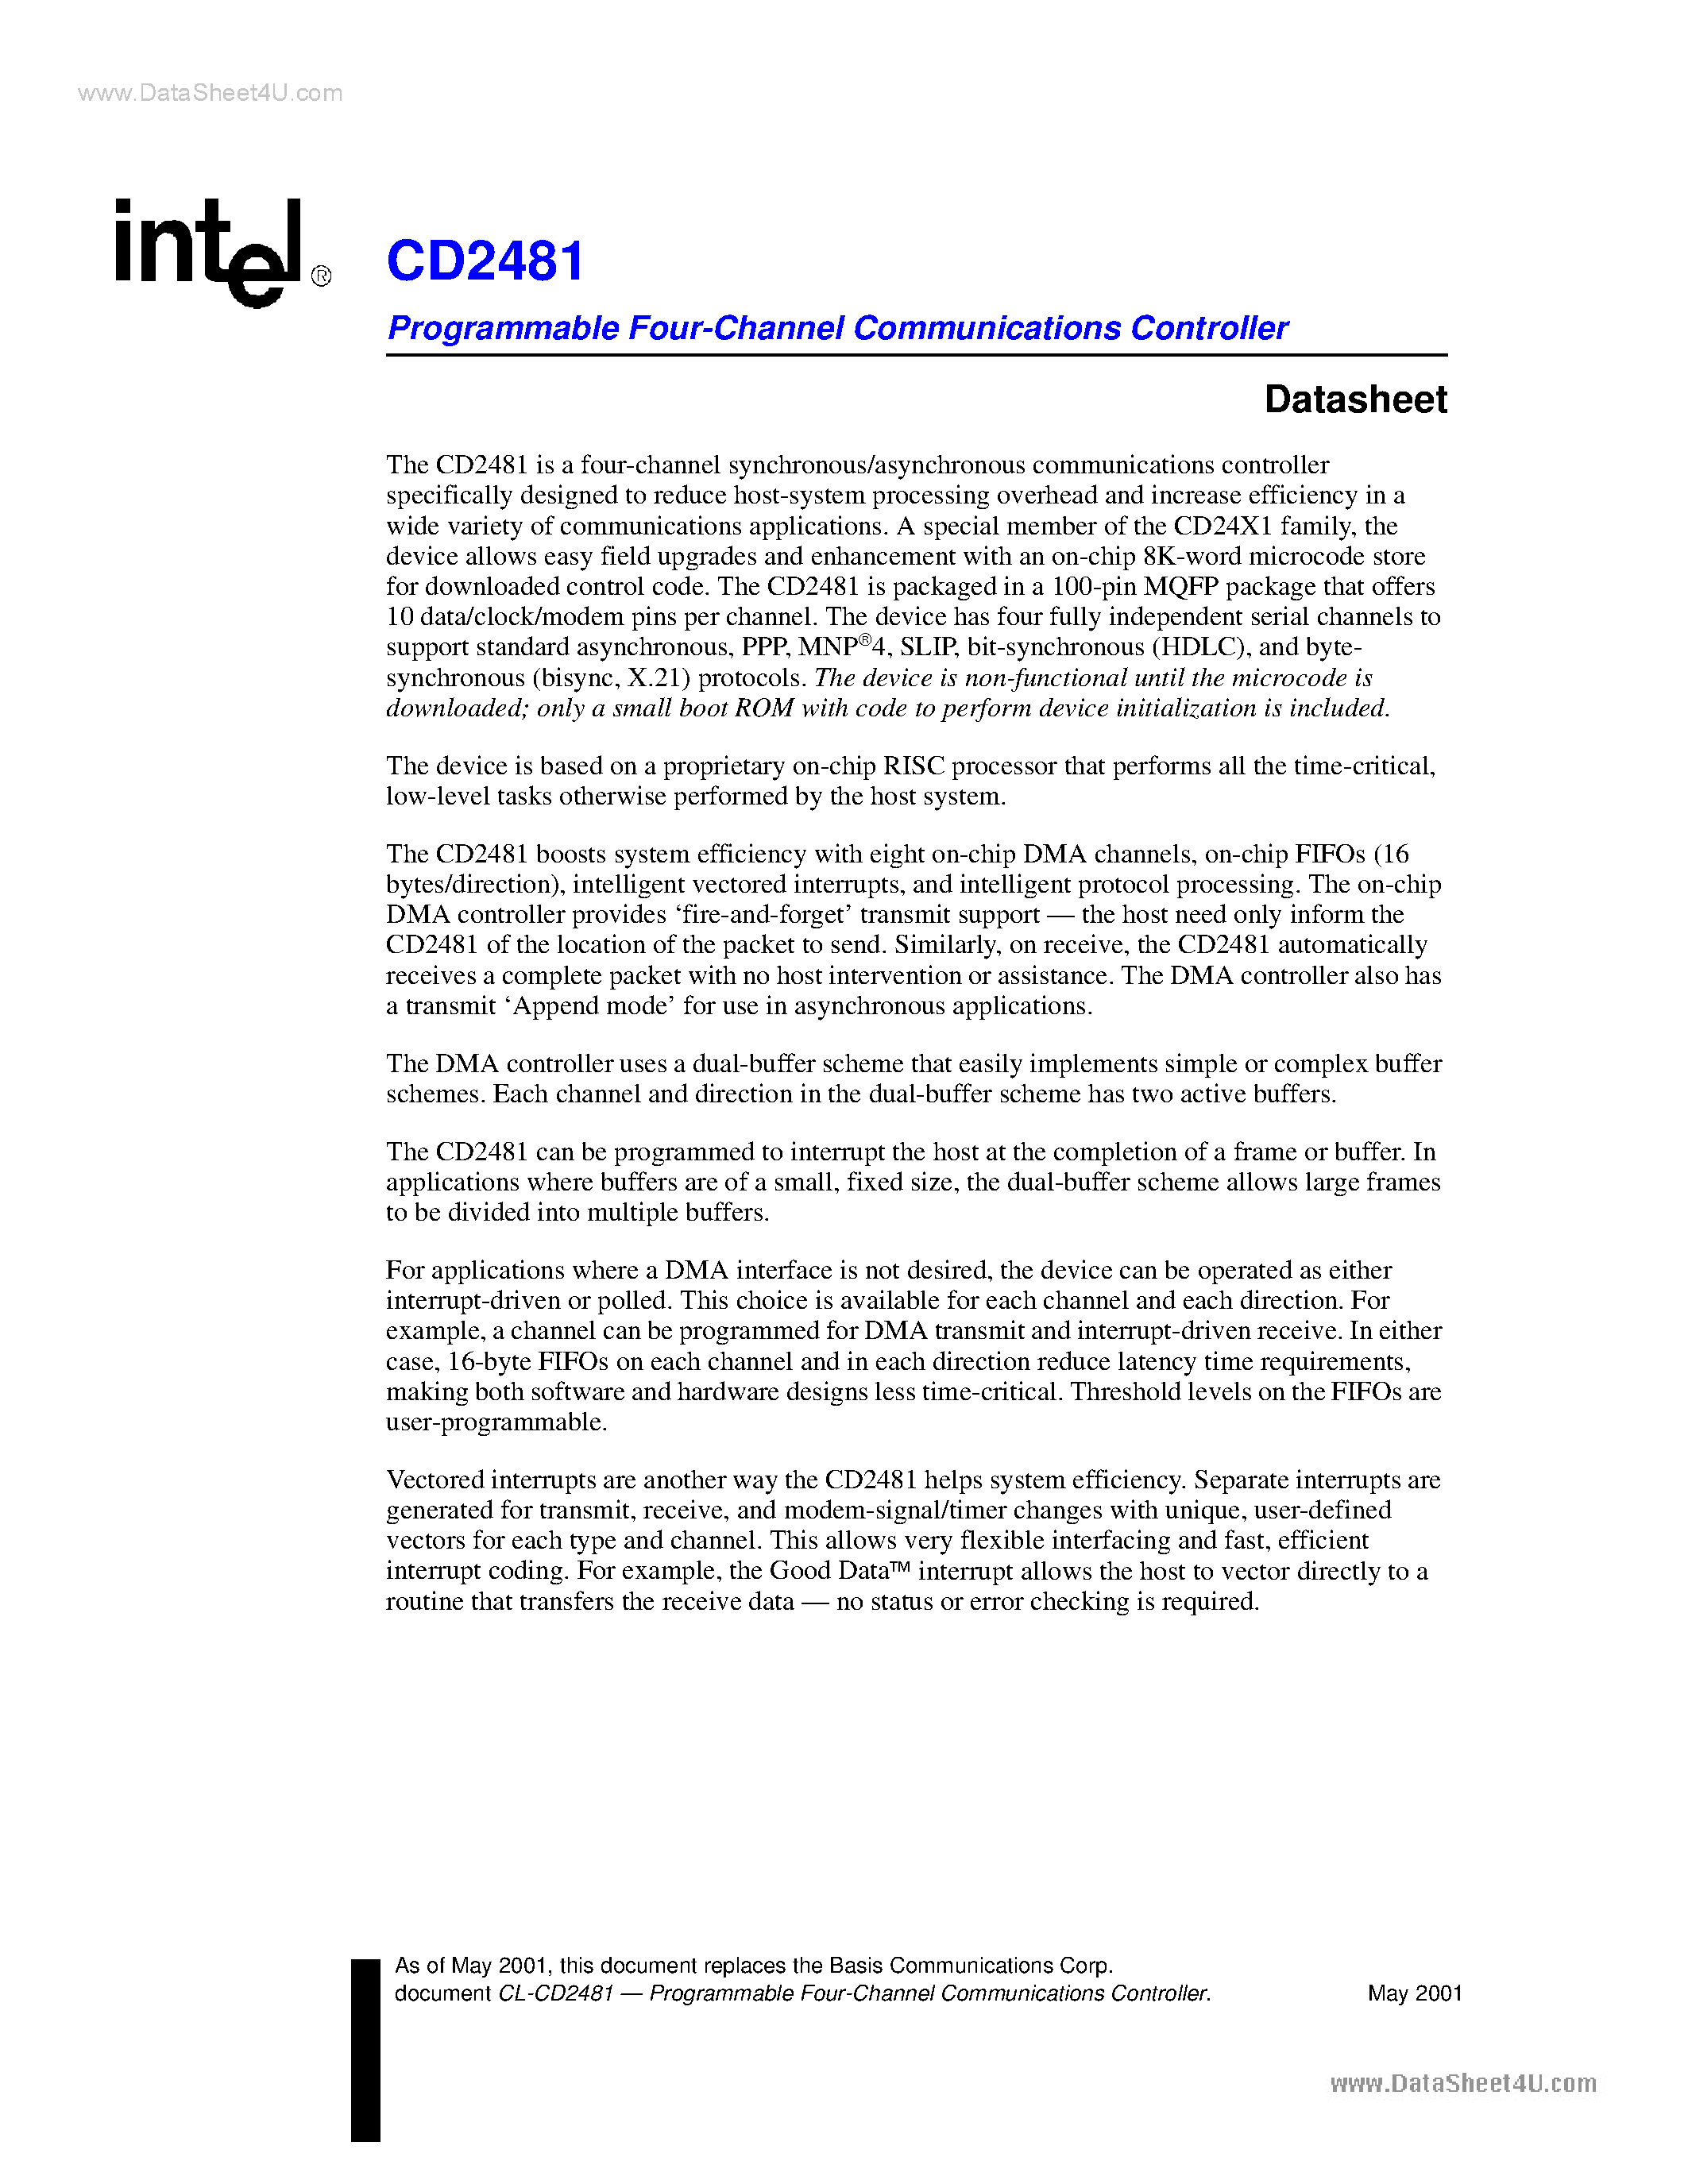 Datasheet CD2481 - Programmable 4-Channel Communications Controller page 1